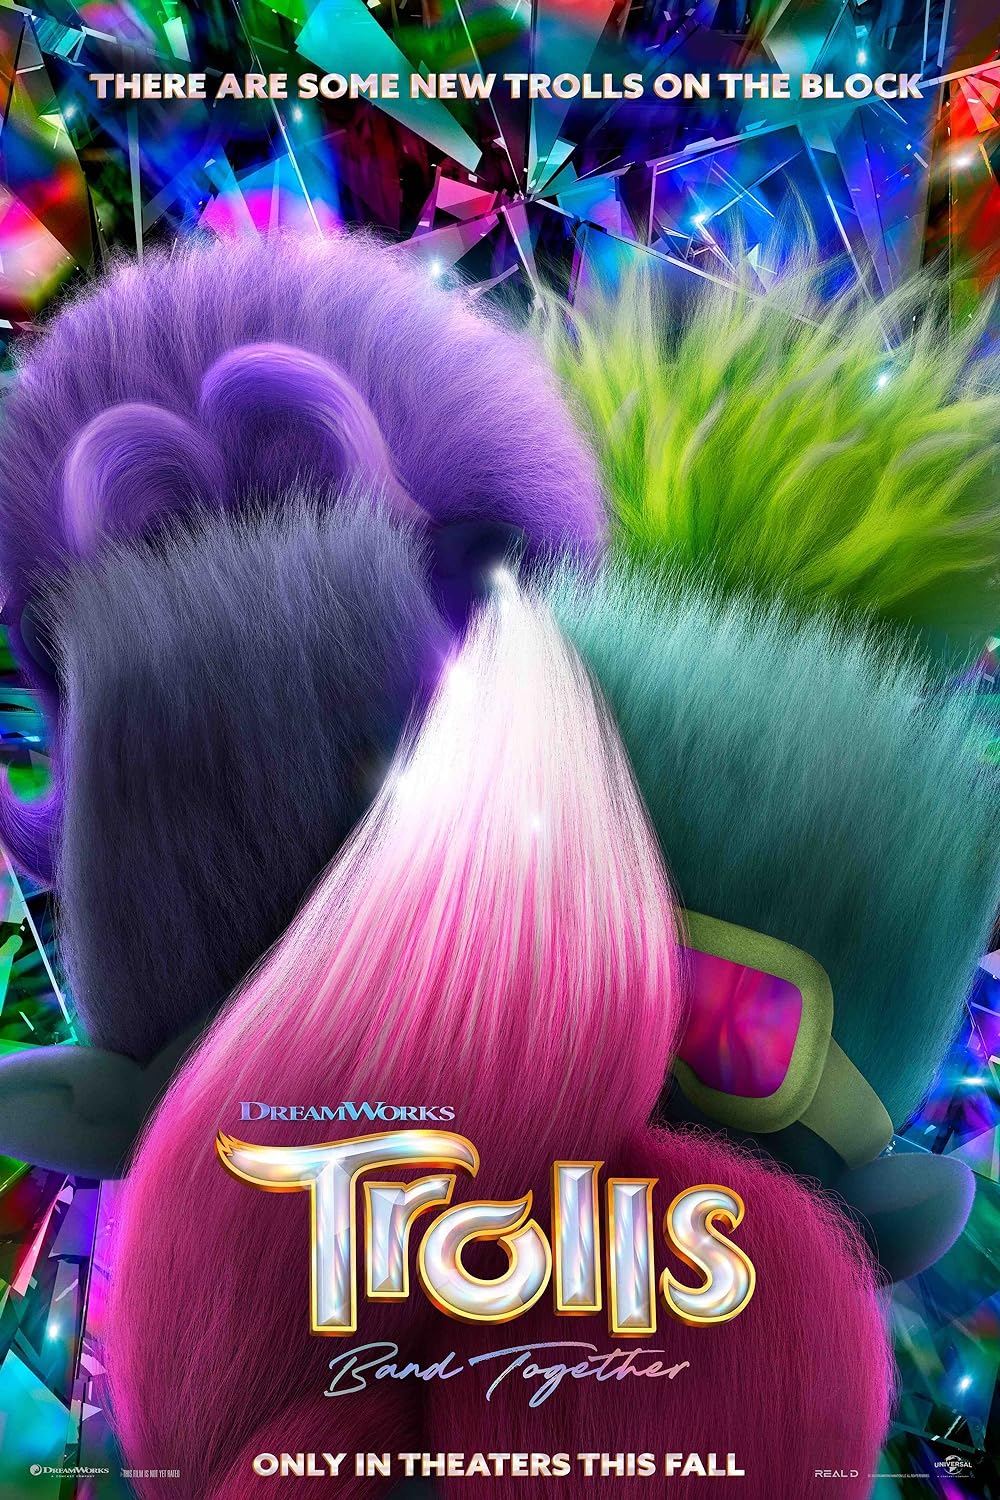 Waterstone Mortgage Free Movie Fridays – Trolls Band Together